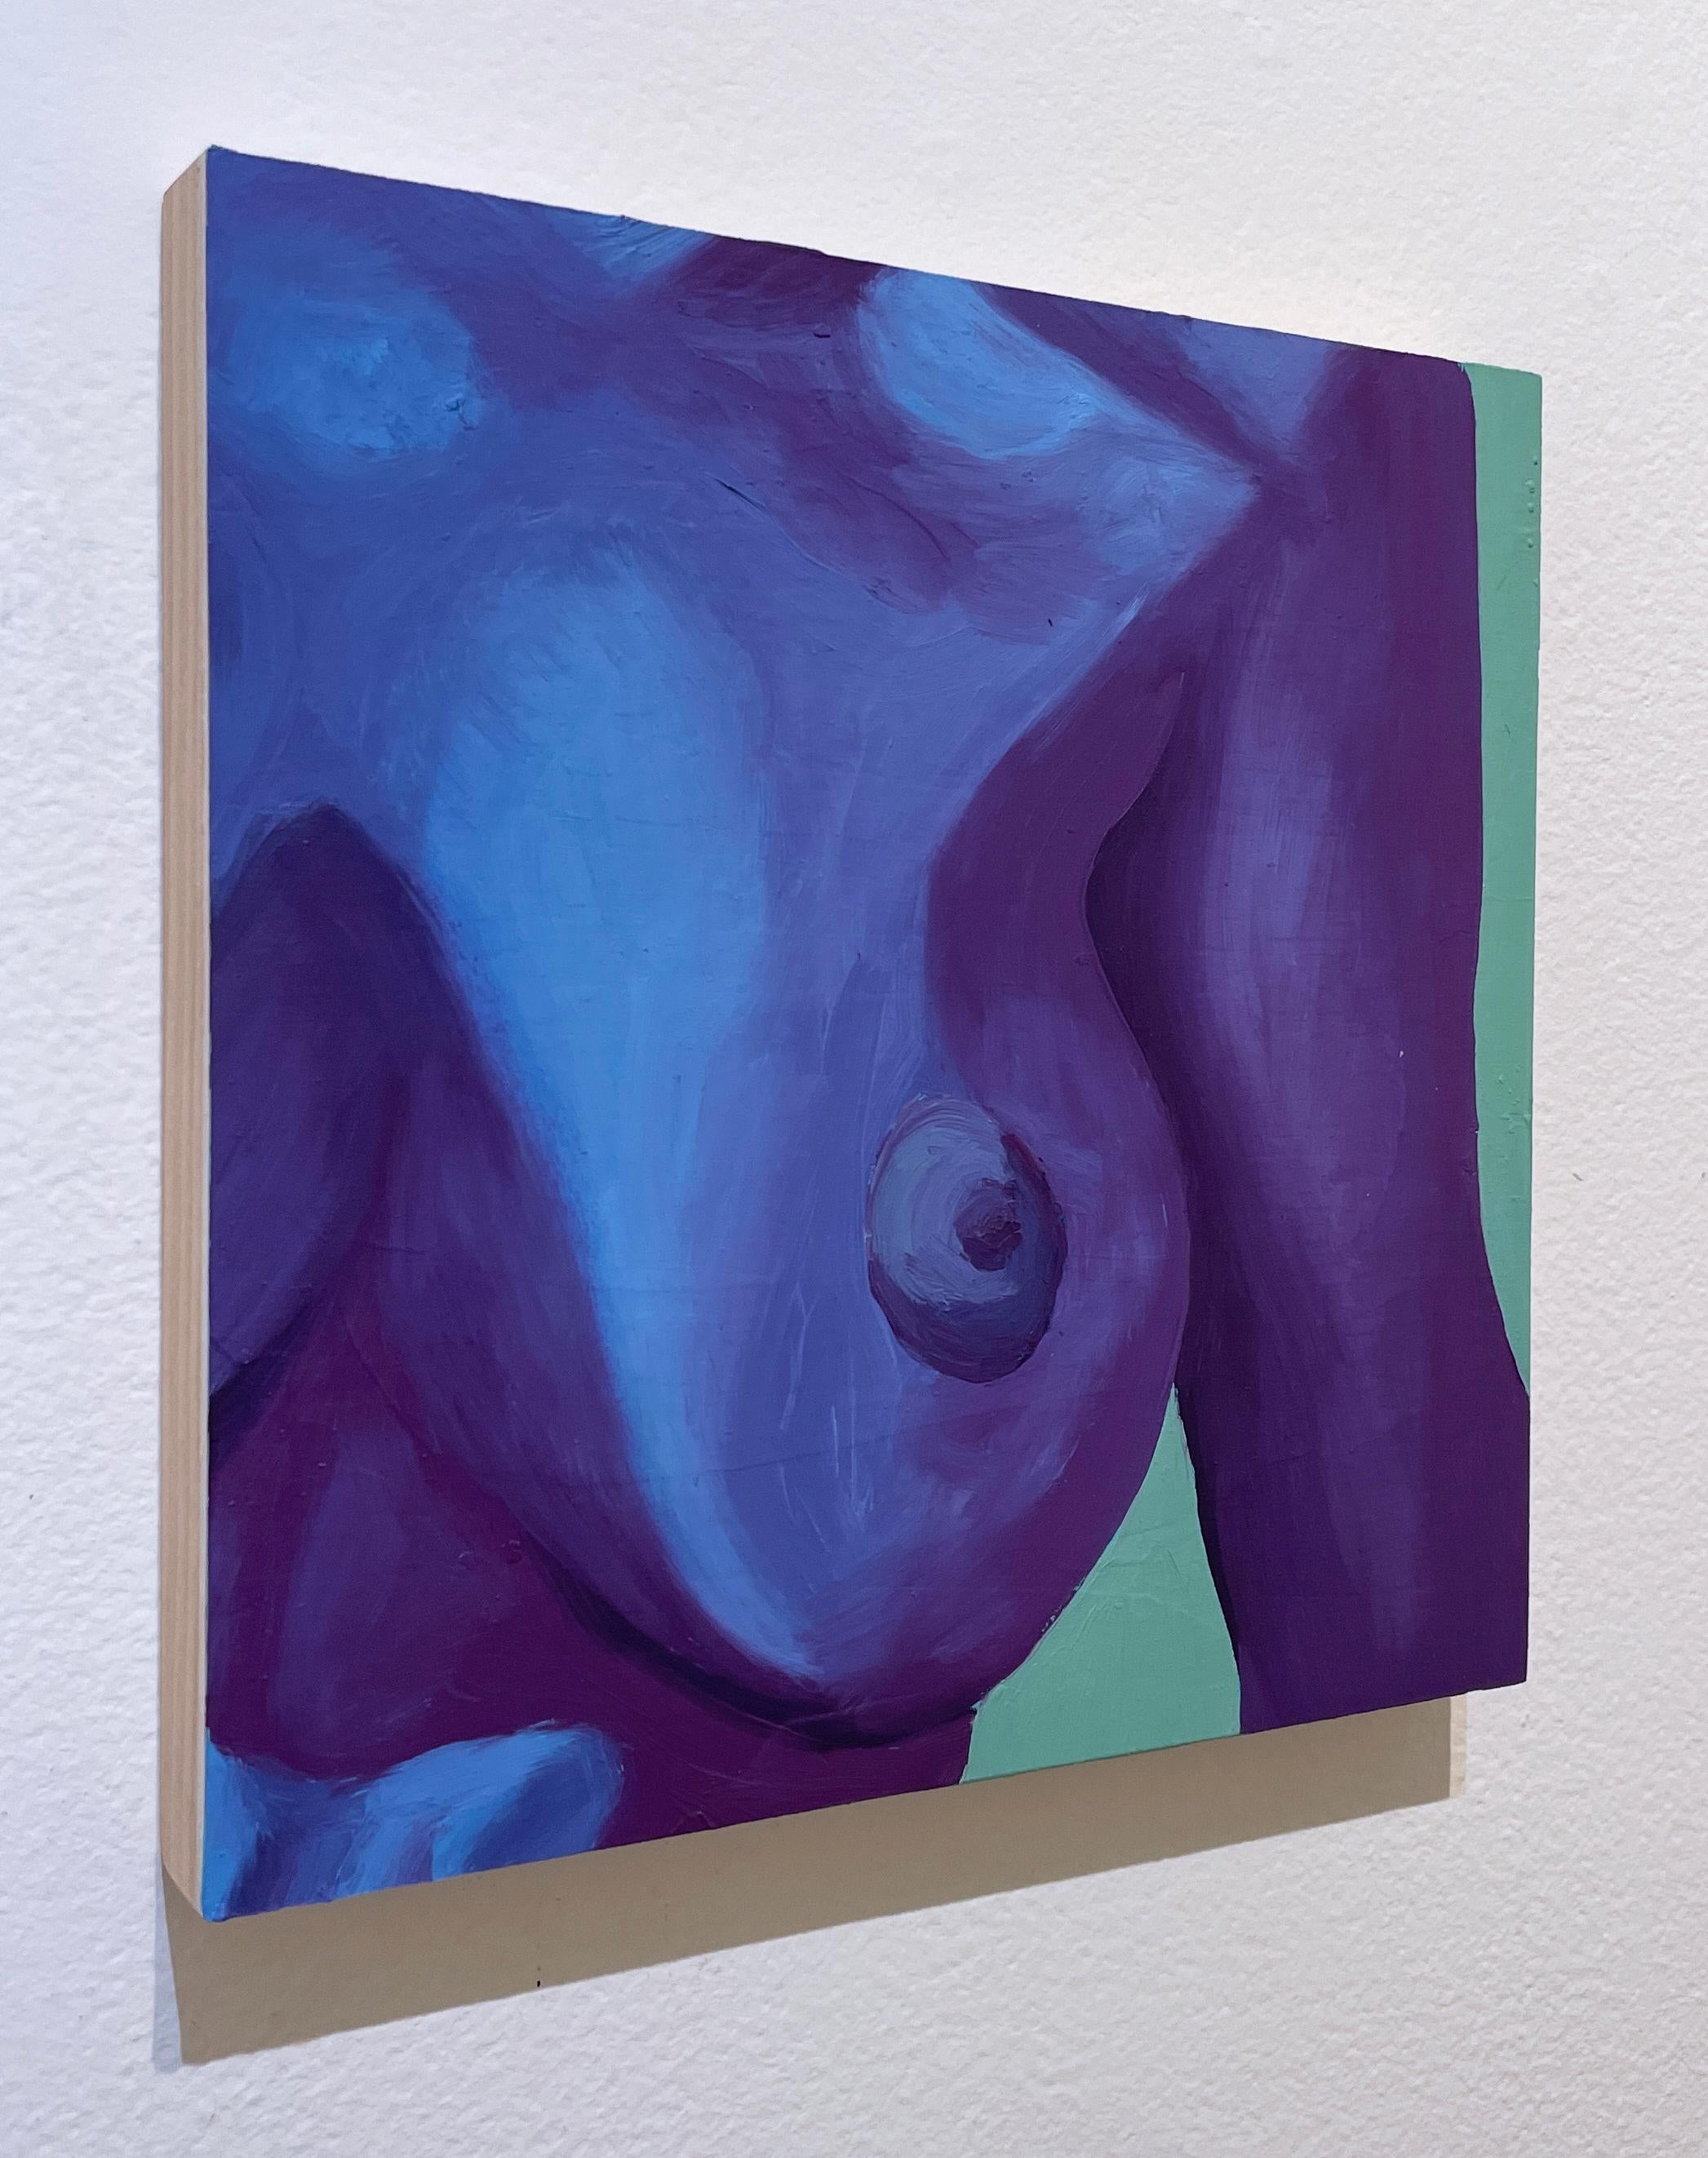 Oil Painting / Figurative Art / Feminist Art and Contemporary Feminist / Human Figure / Nude

Pura (2021), figurative nude, breast, in range of purple, including indigo, and blue and mint green. Oil painting on wood panel.

Hand-signed by